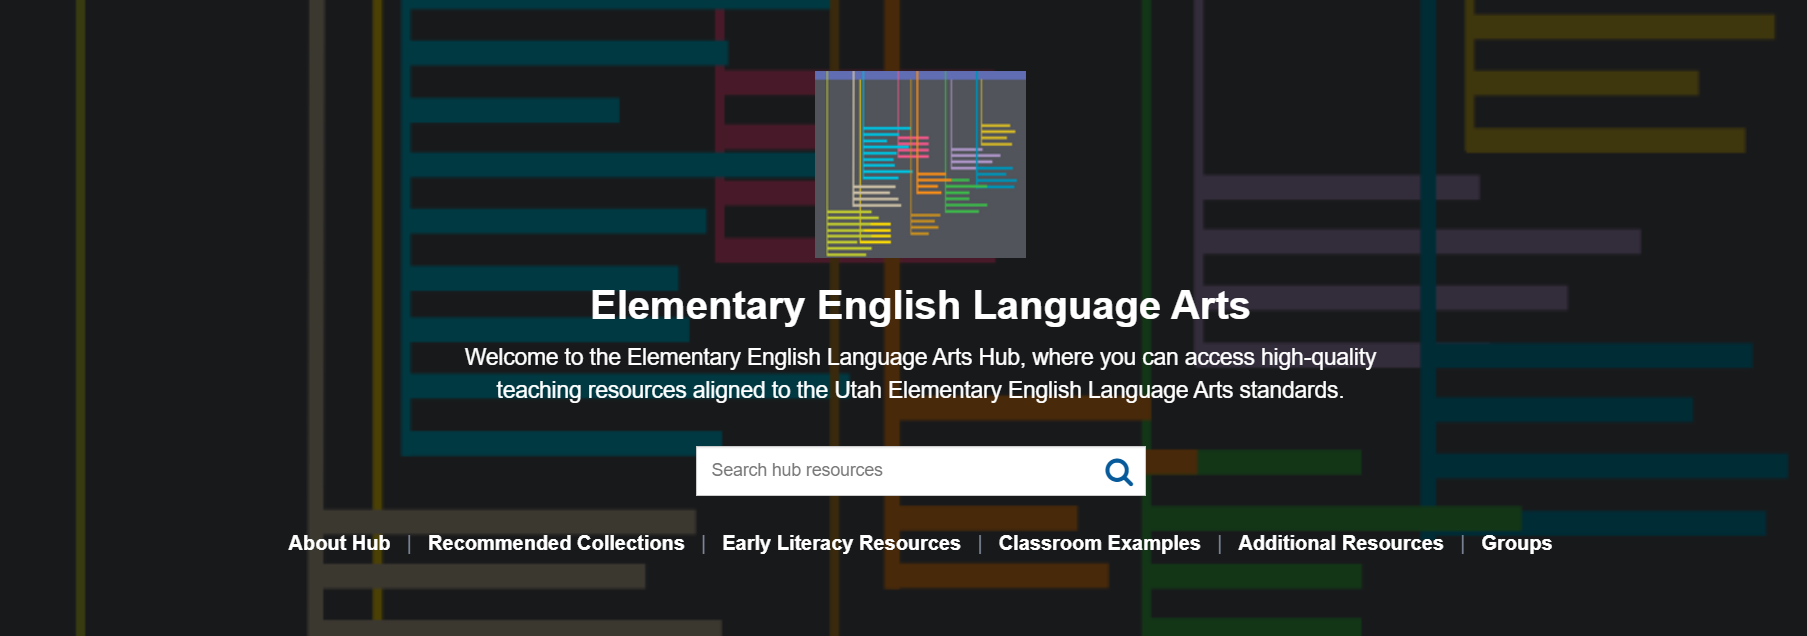 ELA hub banner with links to resources, collections, and classroom examples